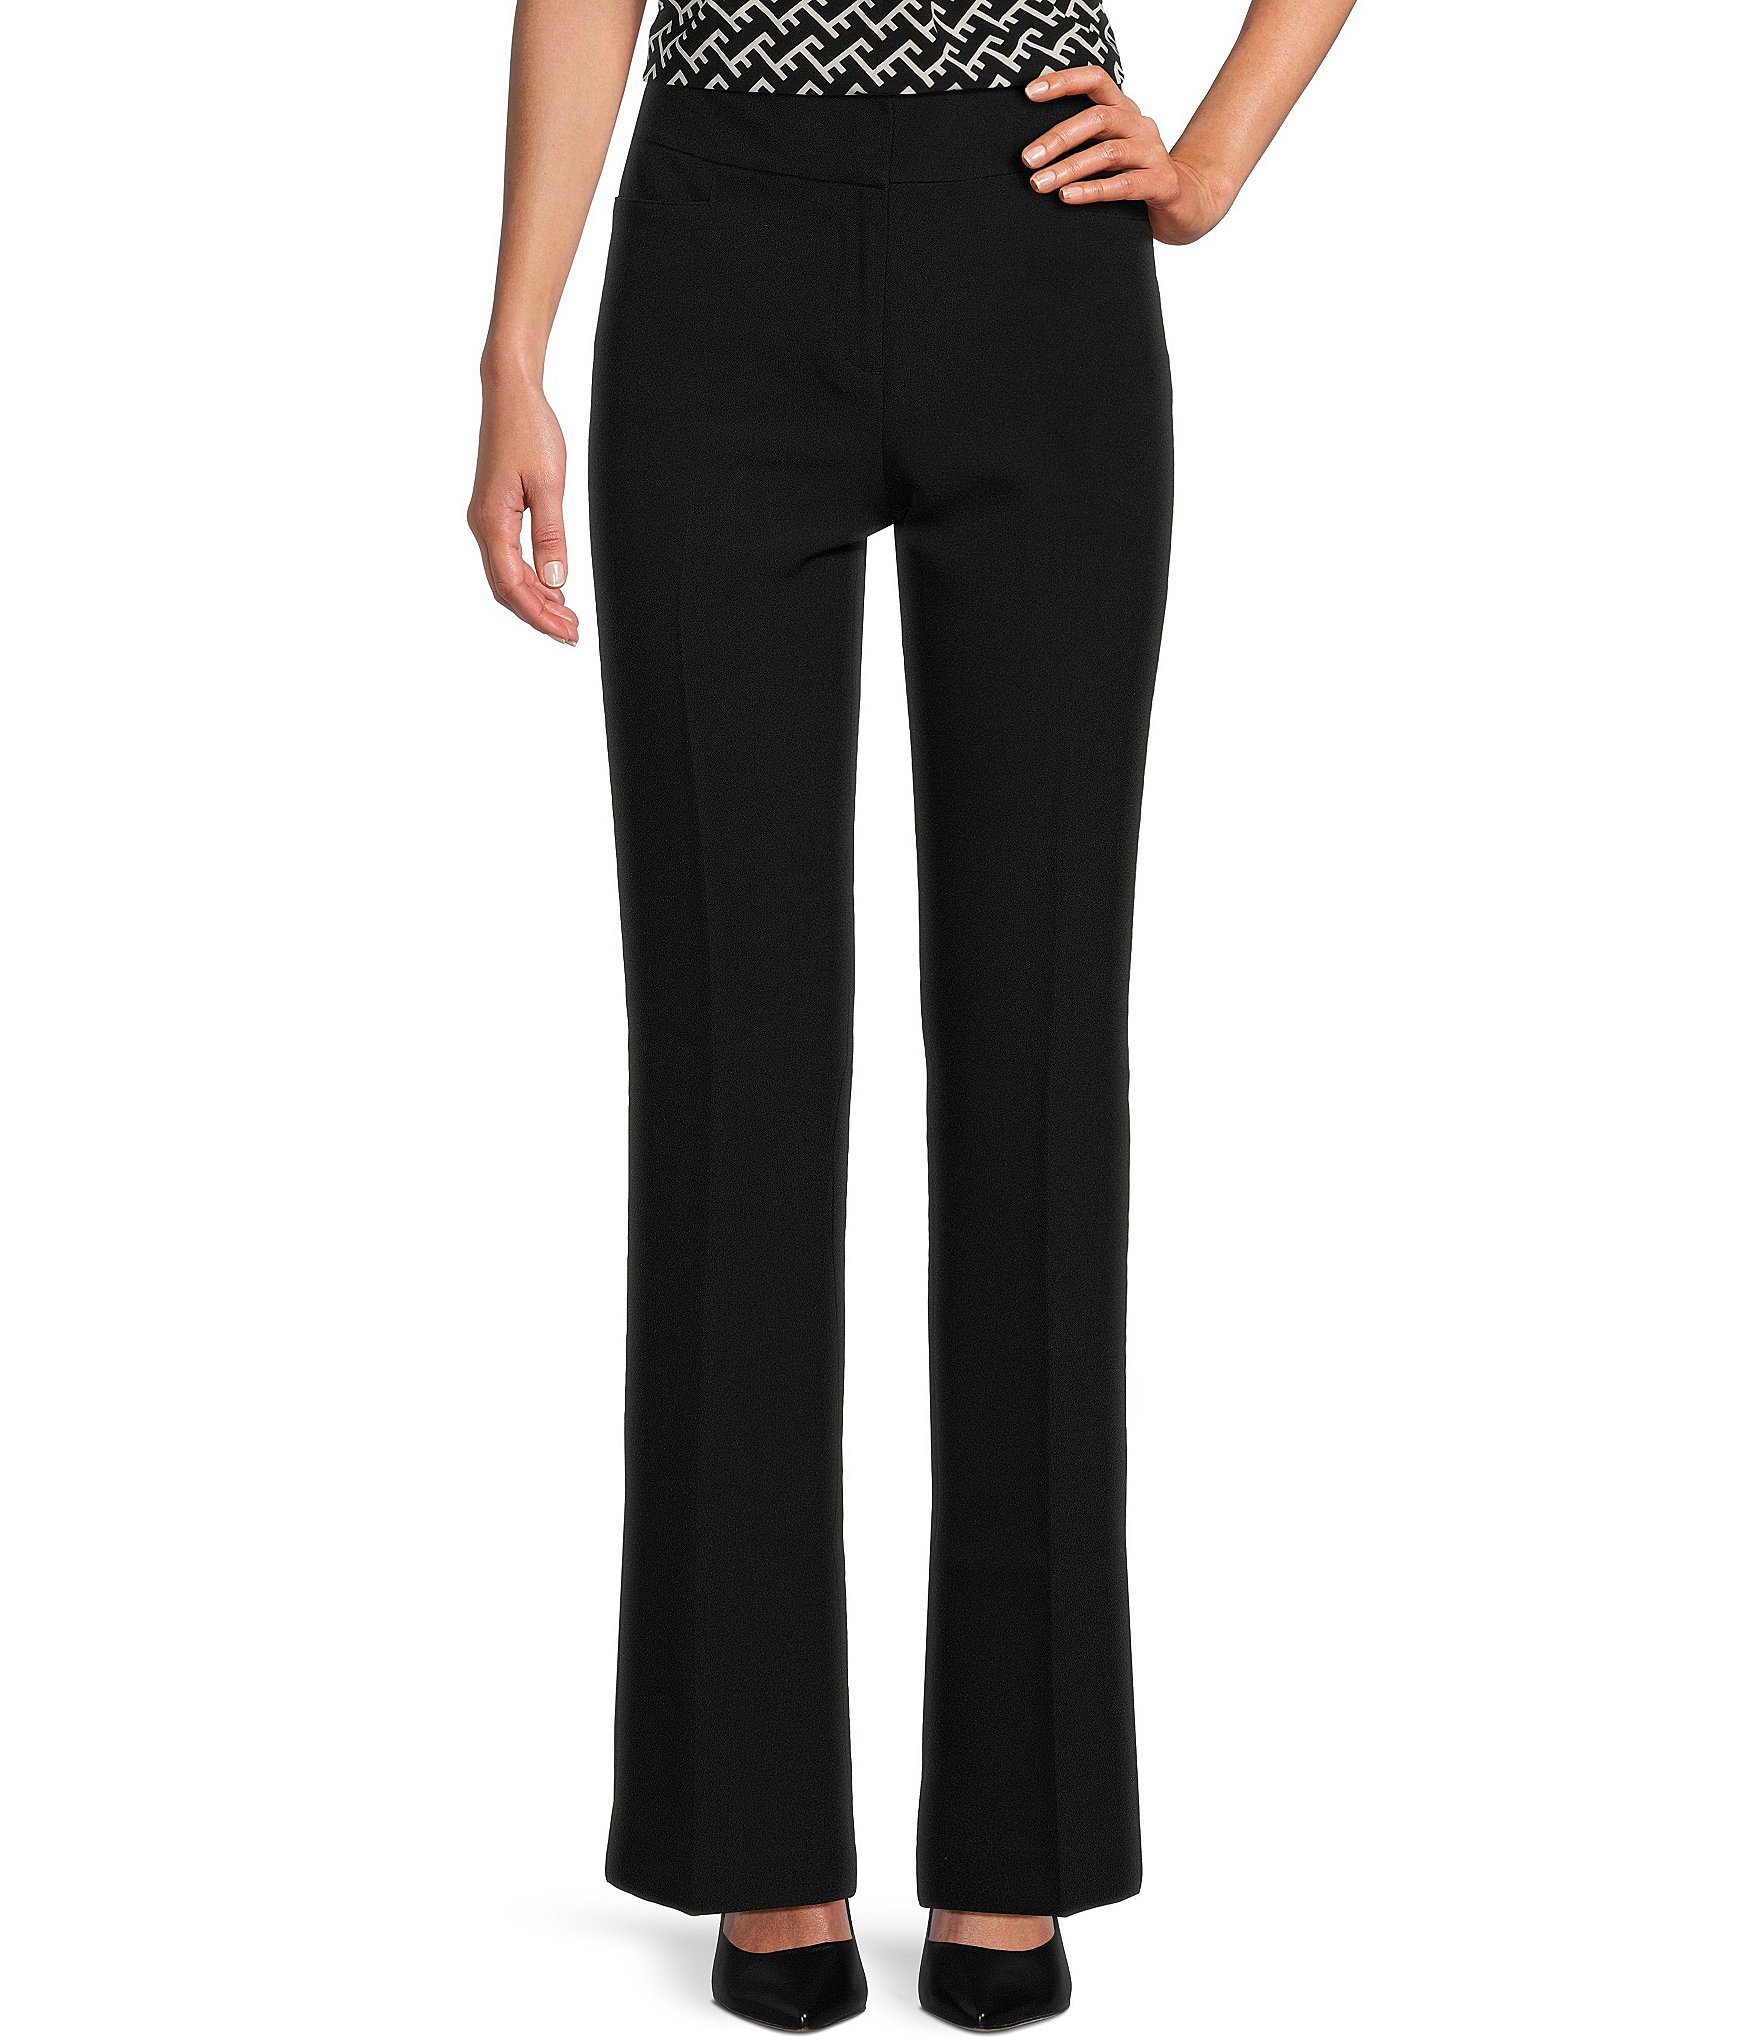 Kasper Separates Kate Classic Fit Navy Crepe Straight Relaxed Pants - $79